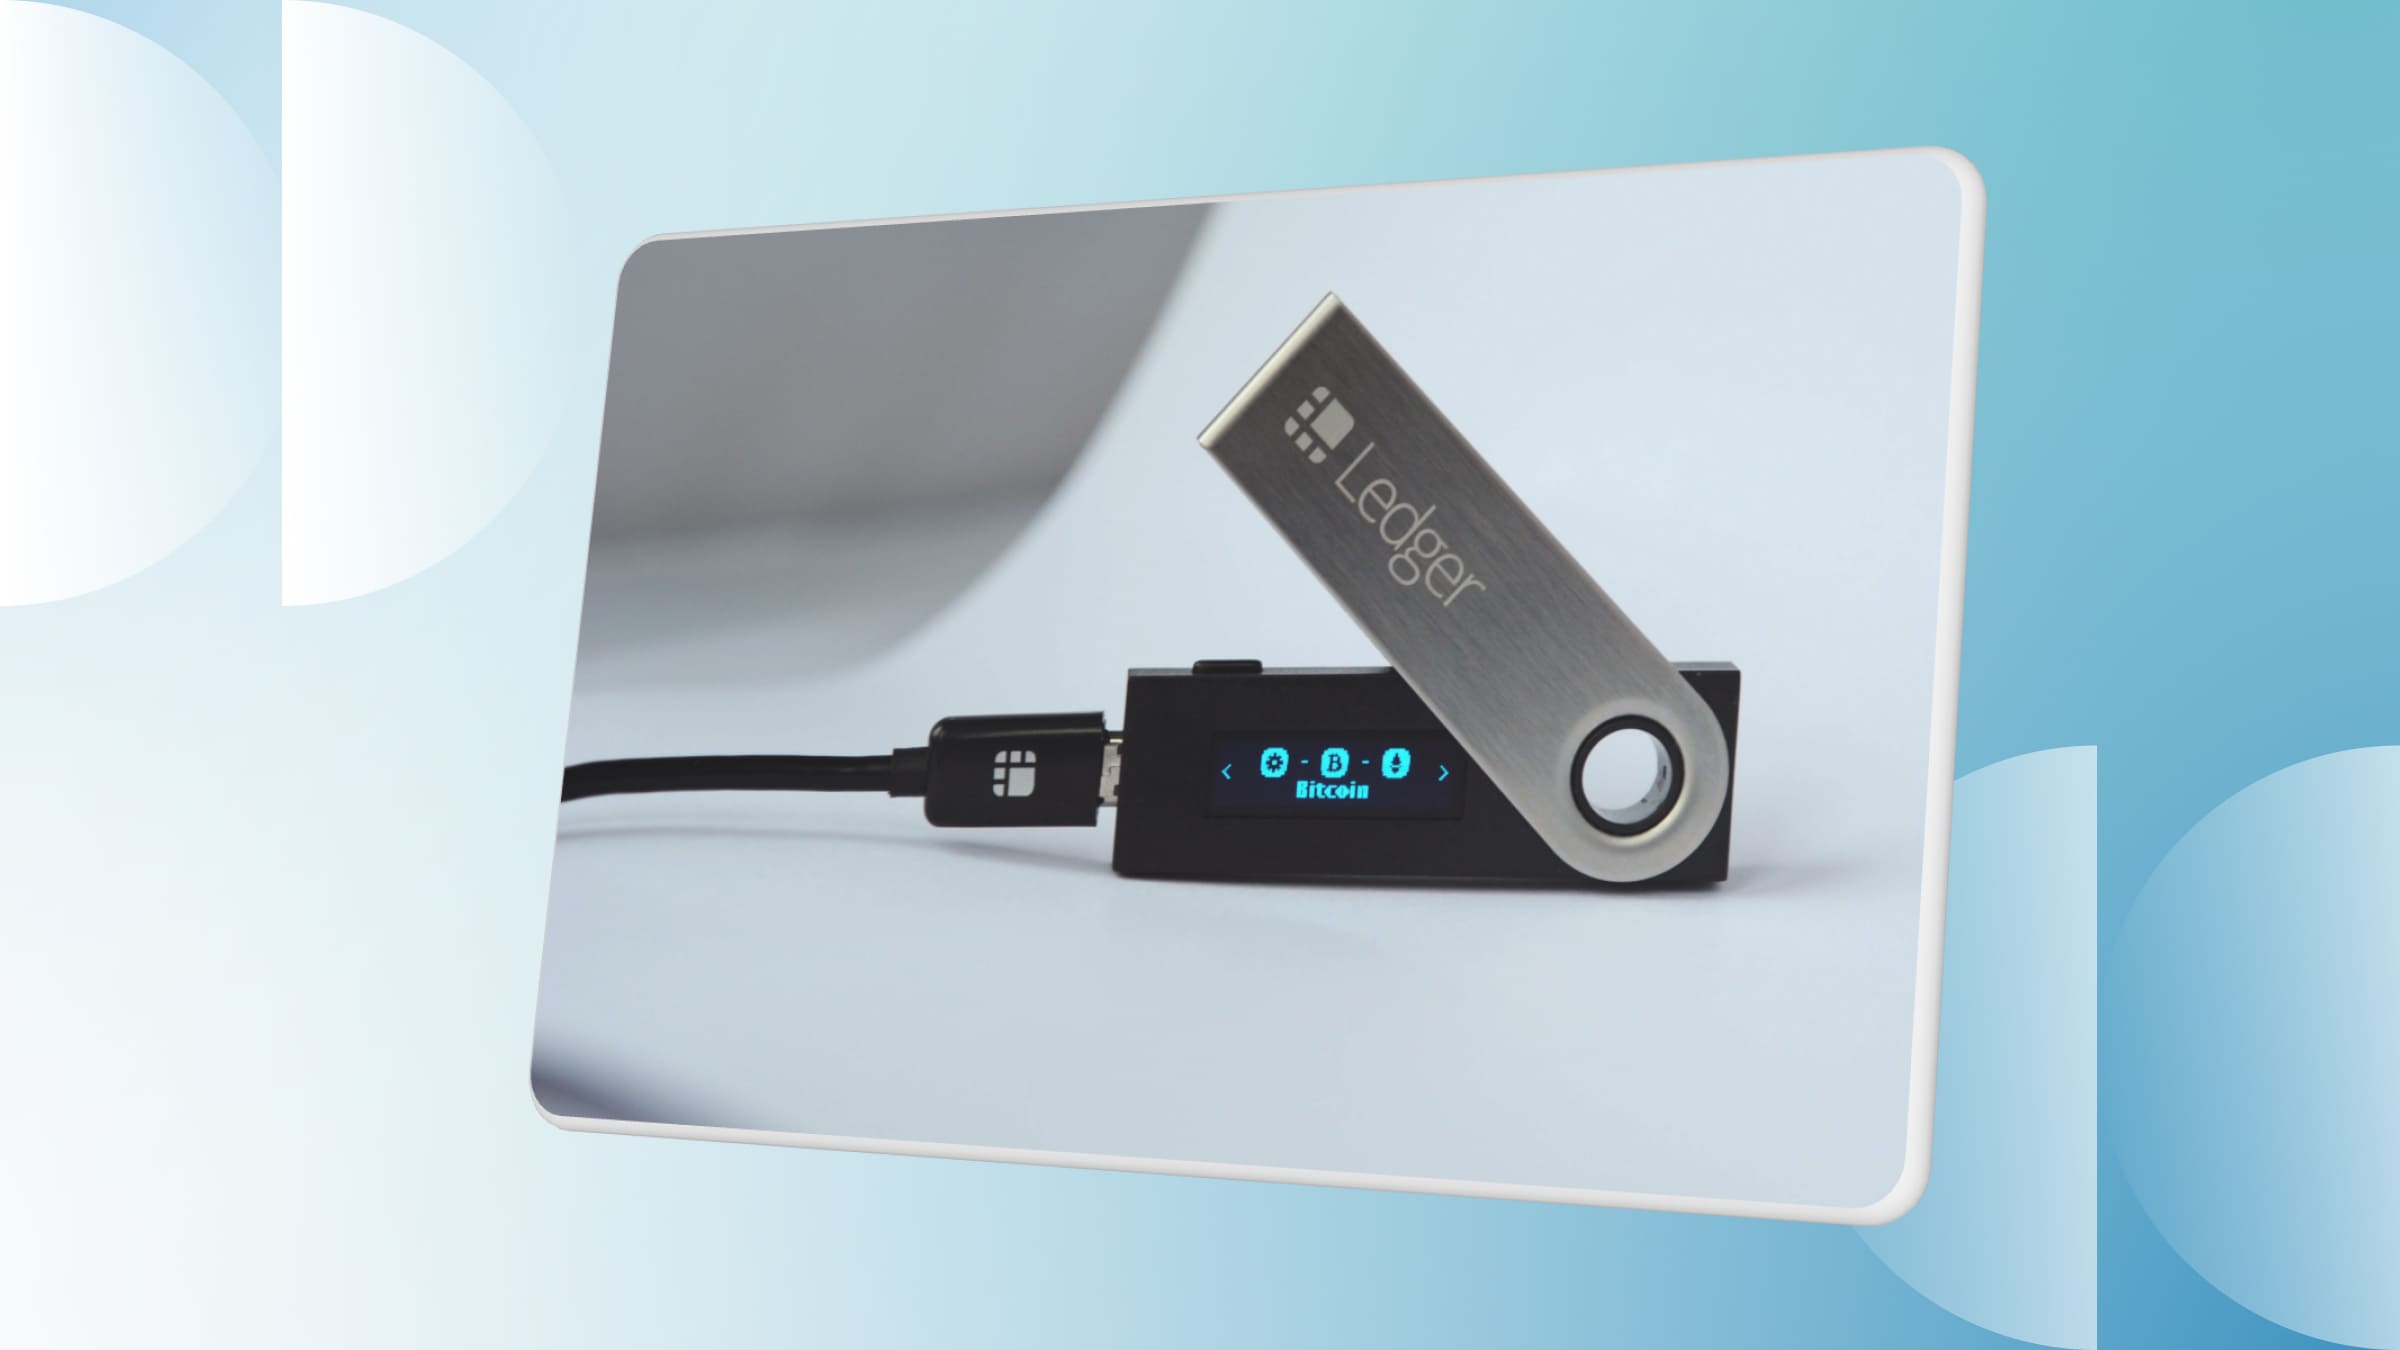 Ledger is one of the most popular hardware cryptocurrency wallets.